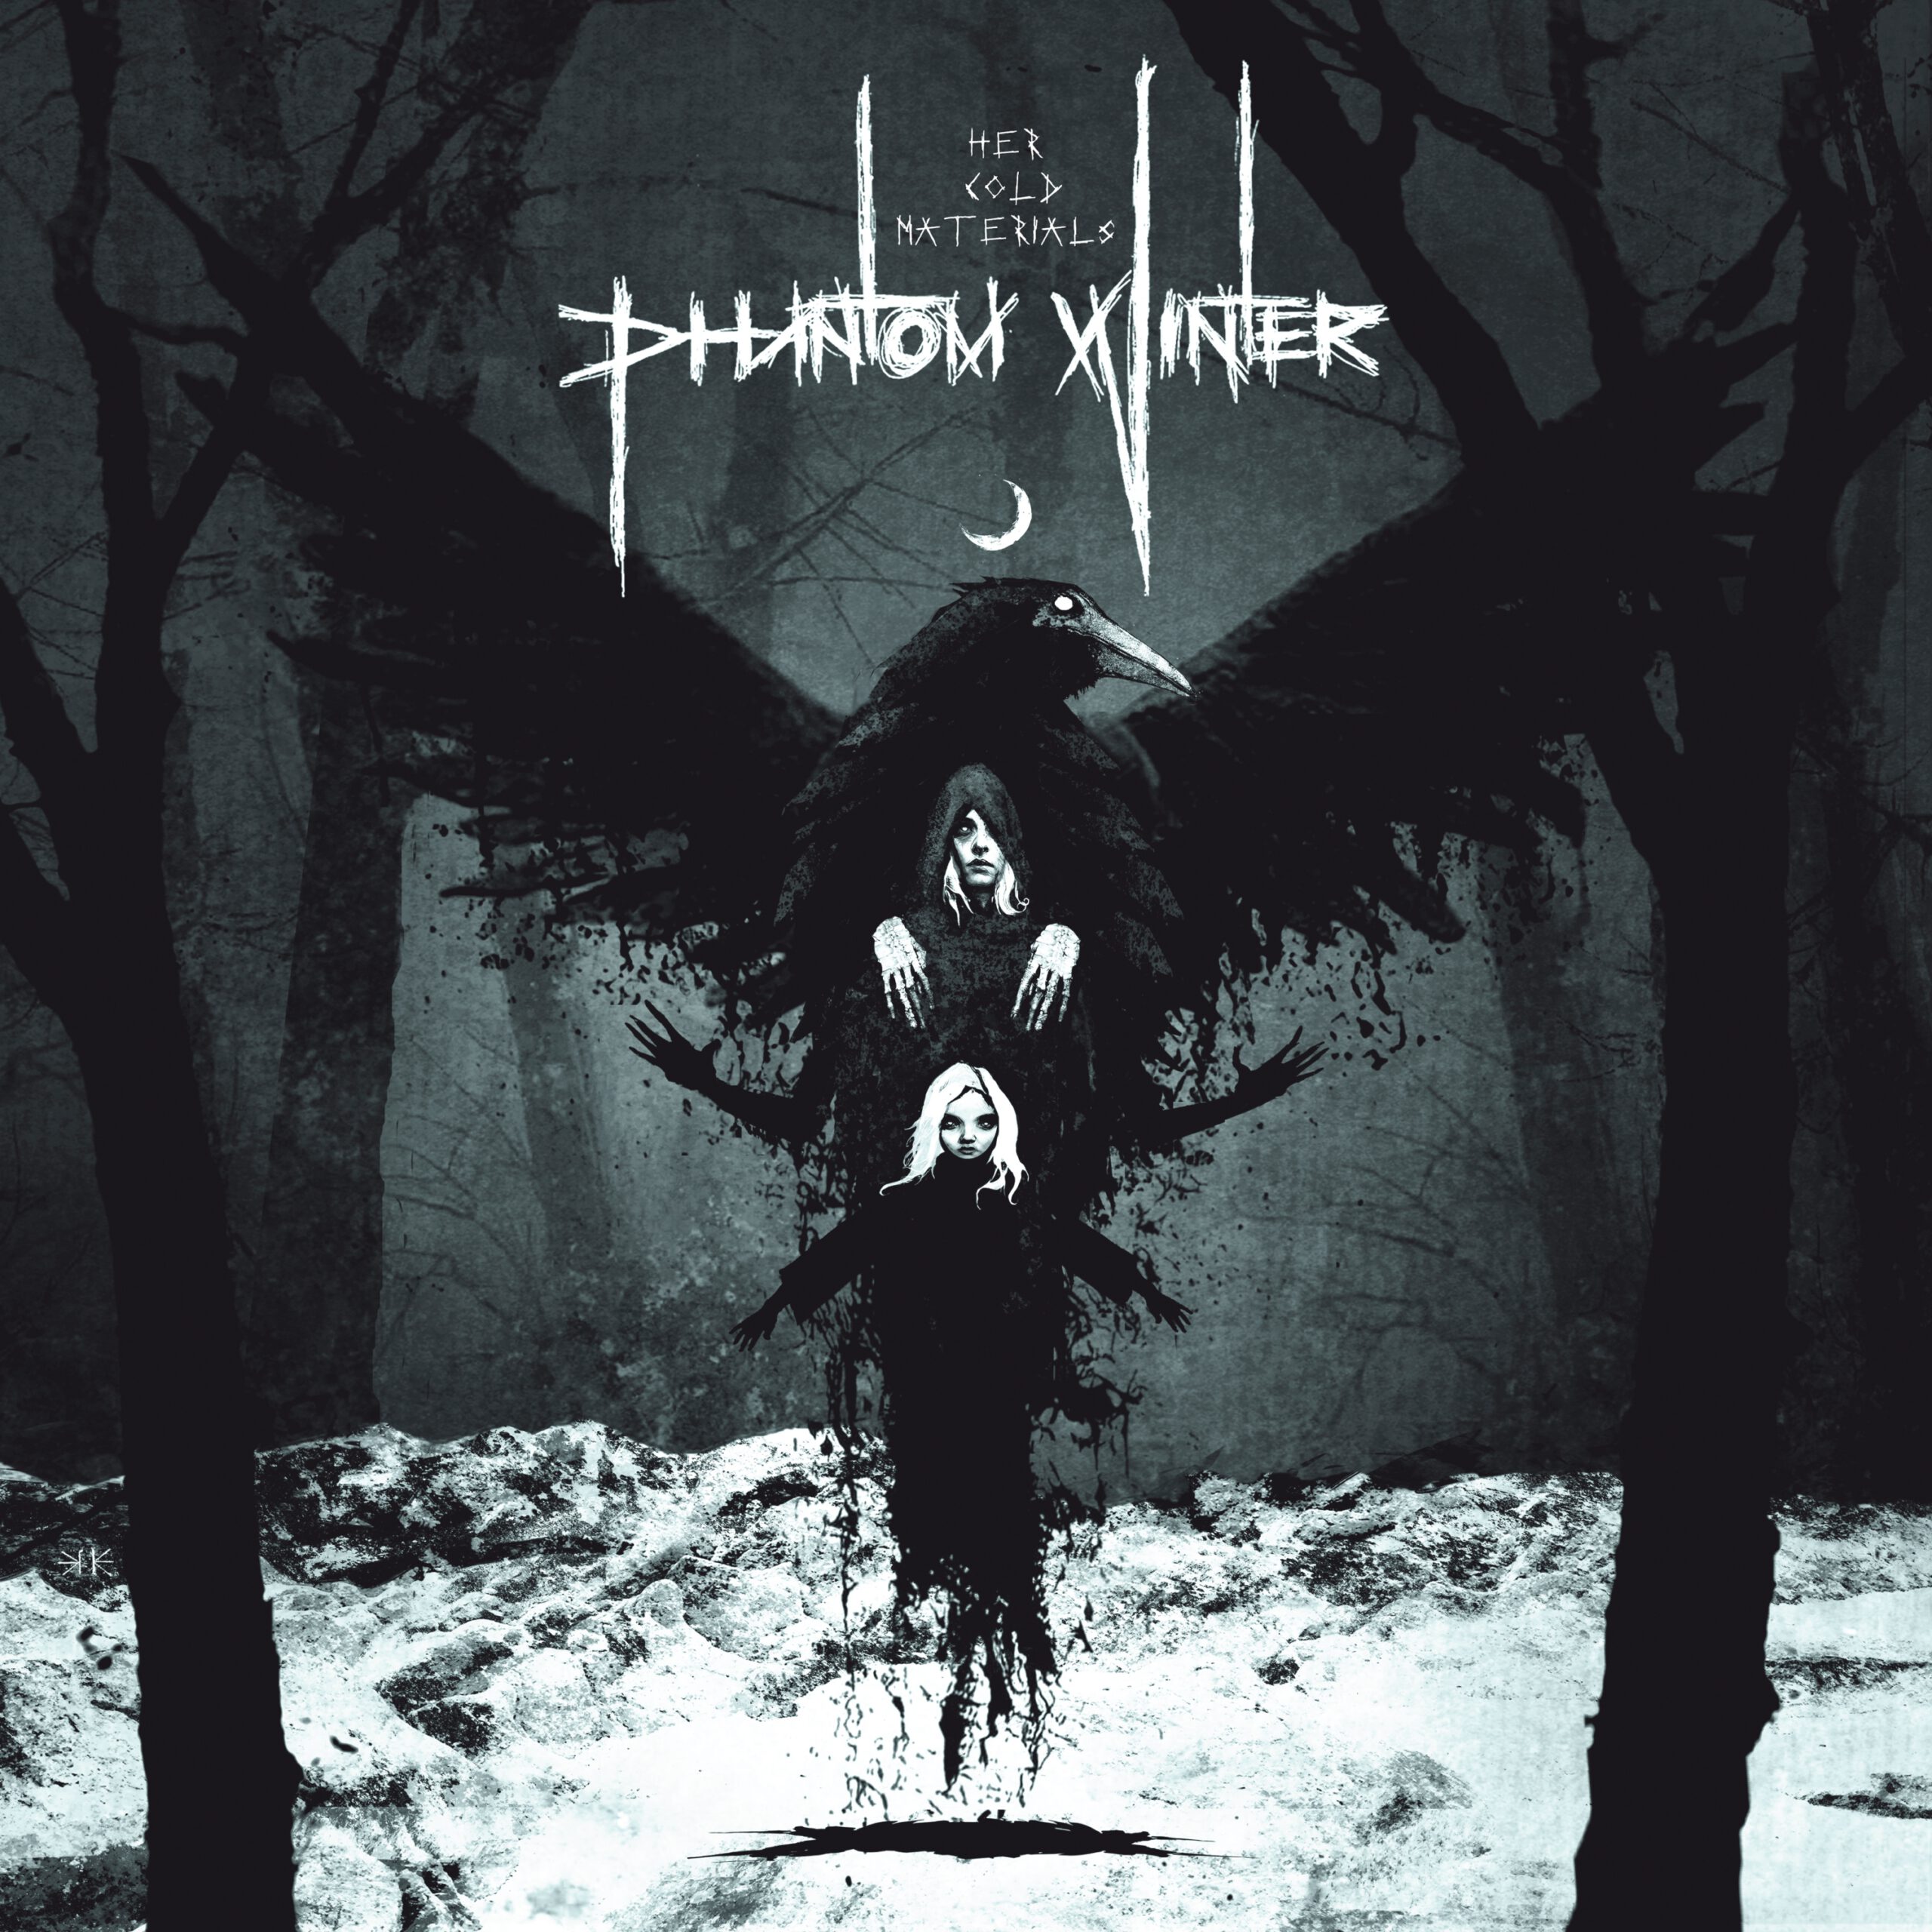 Phantom Winter – Her Cold Materials col.LP/CD Pressing Info: 100 peppermint green splatter LP Bundle with Pin & Patch (TCM mailorder only) 100 peppermint green splatter LP (TCM mailorder only) 500 frost clear splatter LP 50 digipack CDs with Pin & Patch (TCM mailorder only) 350 CDs digipack